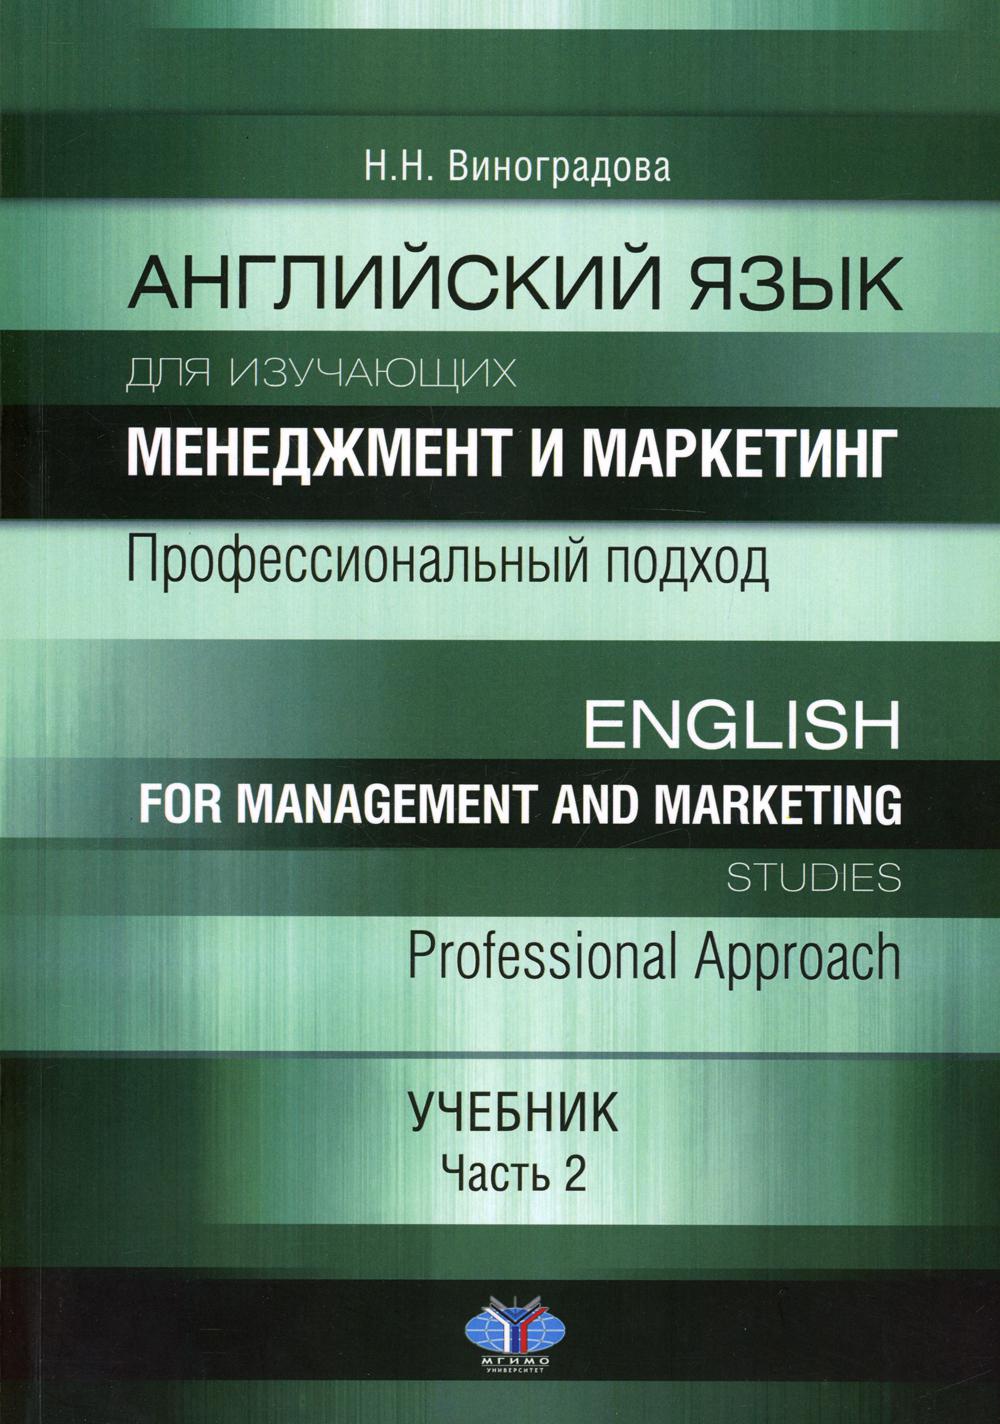       .  . English for management and marketing studies. Professional Approach. .  2